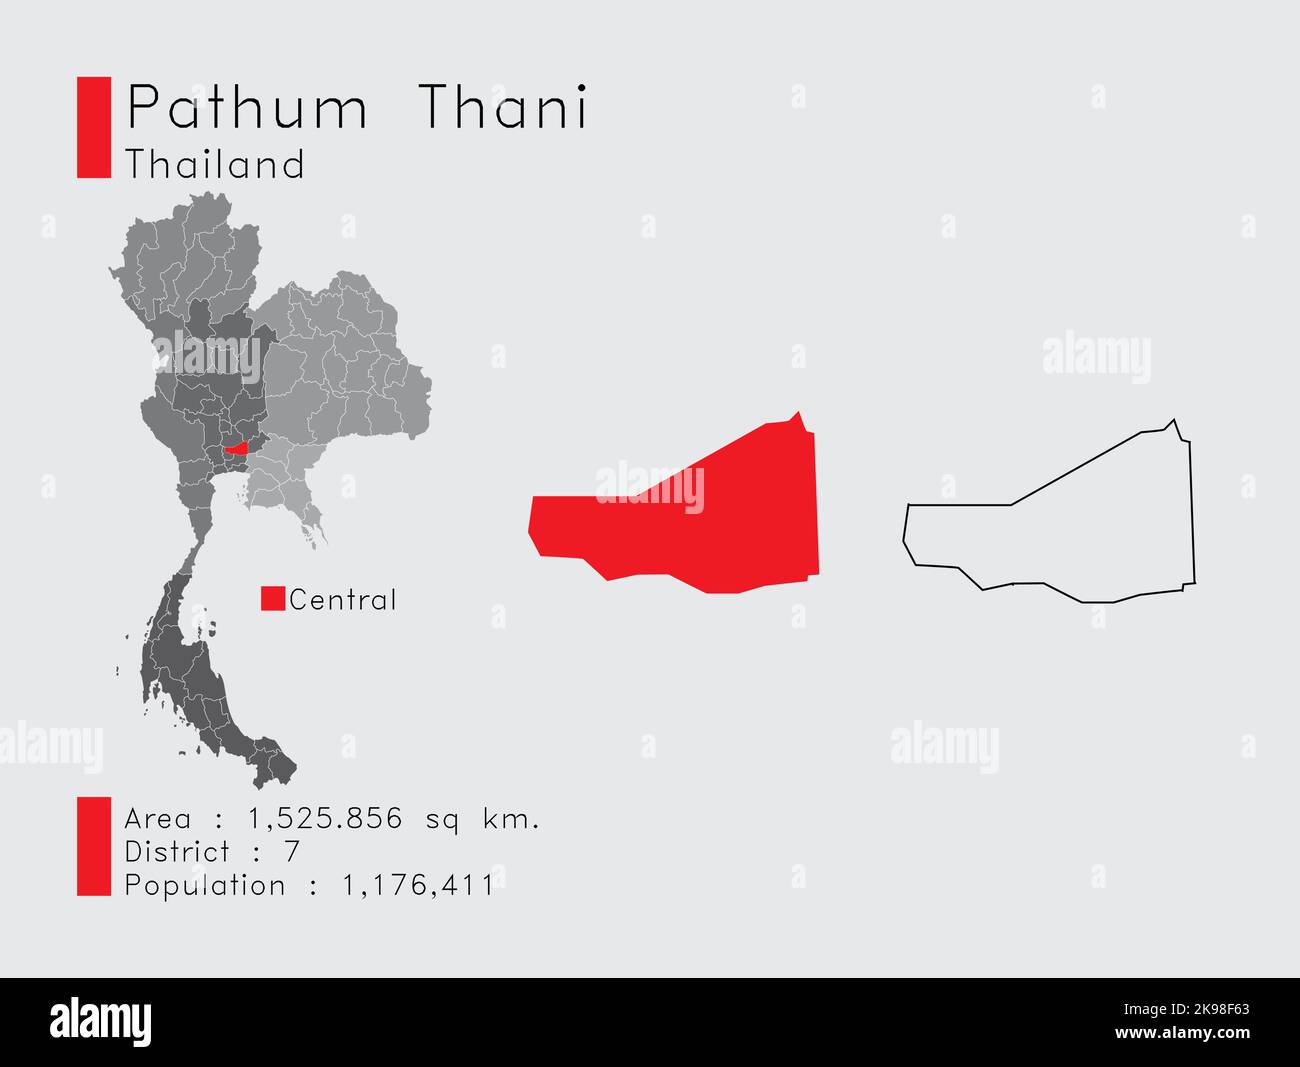 A Set of Infographic Elements for the Province Pathum Thani Position in Thailand. and Area District Population and Outline. Vector with Gray Backgroun Stock Vector